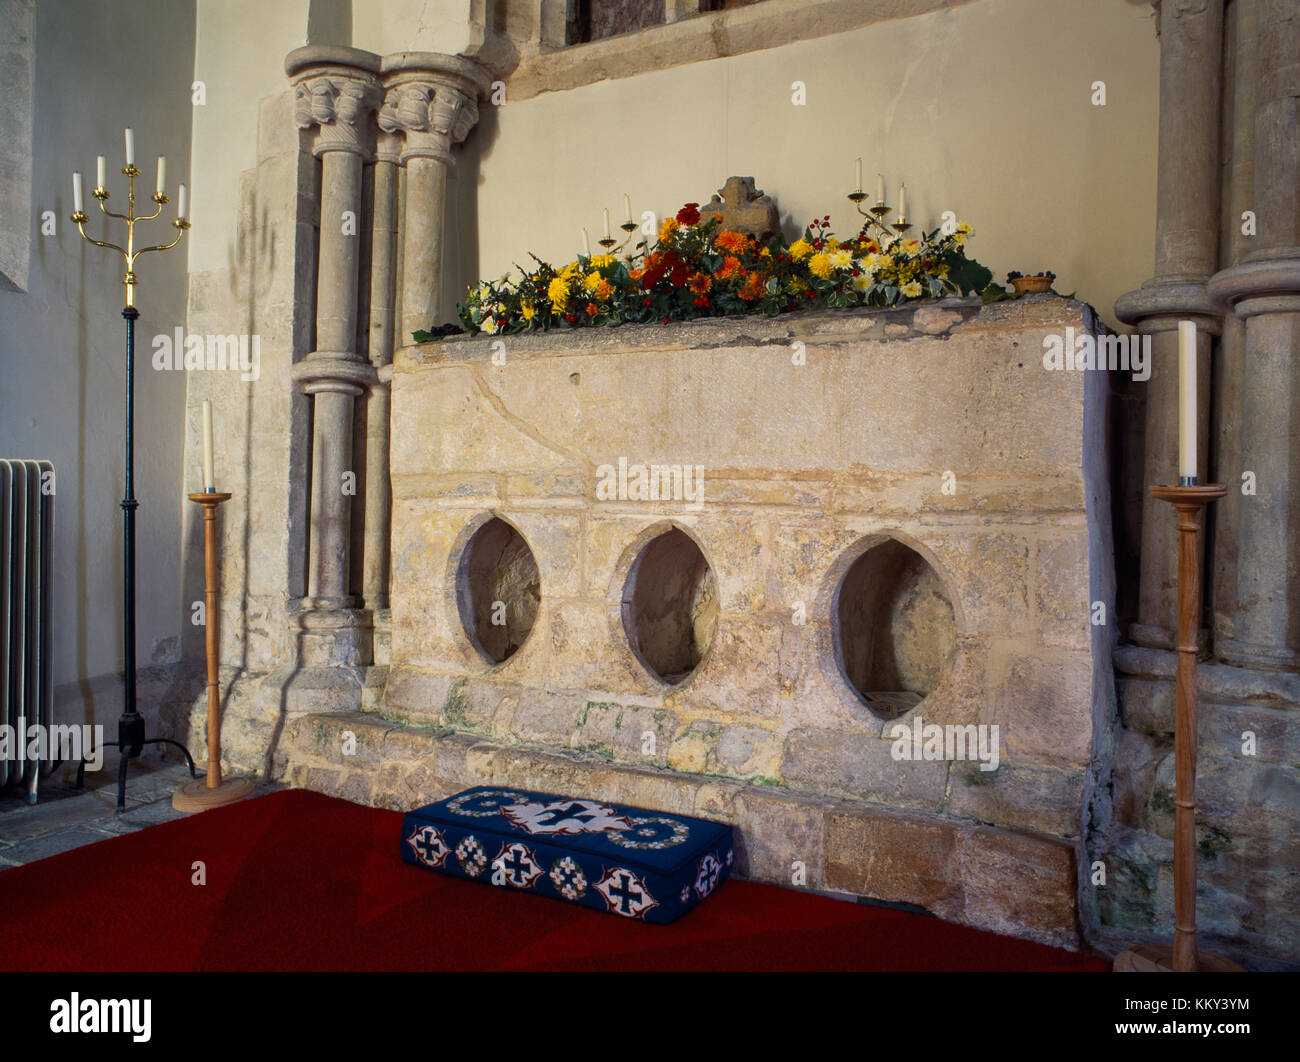 Early C13th shrine containing the relics of St Candida (St Wite) in N transept of St Candida & Holy Cross Church, Whitchurch Canonicorum, Dorset, UK. Stock Photo